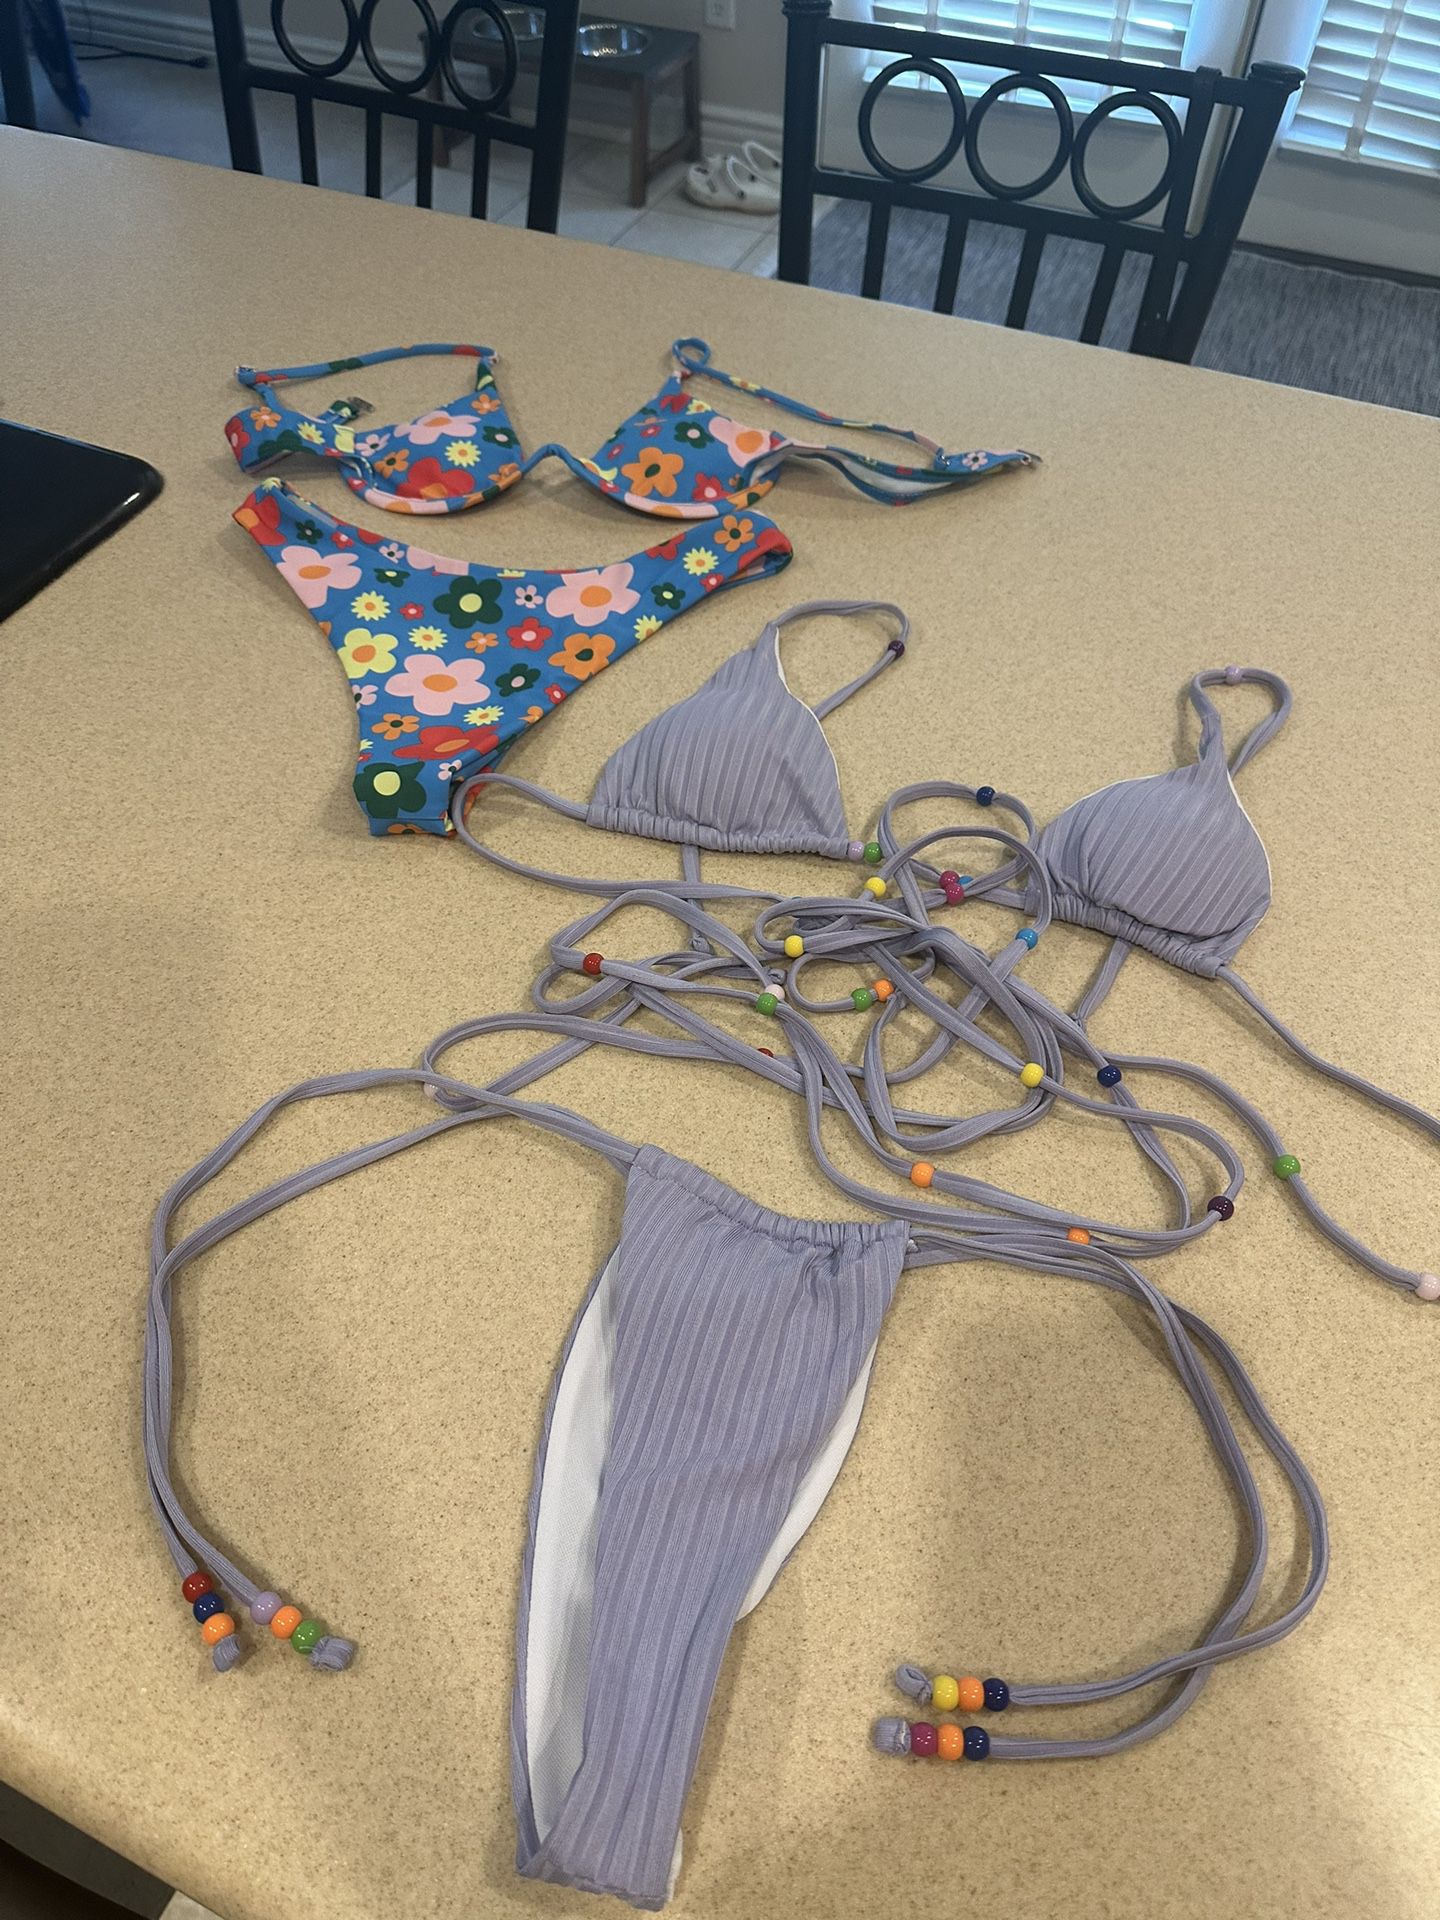  Bathing Suit Lot Of 2 For $6 - Size Small